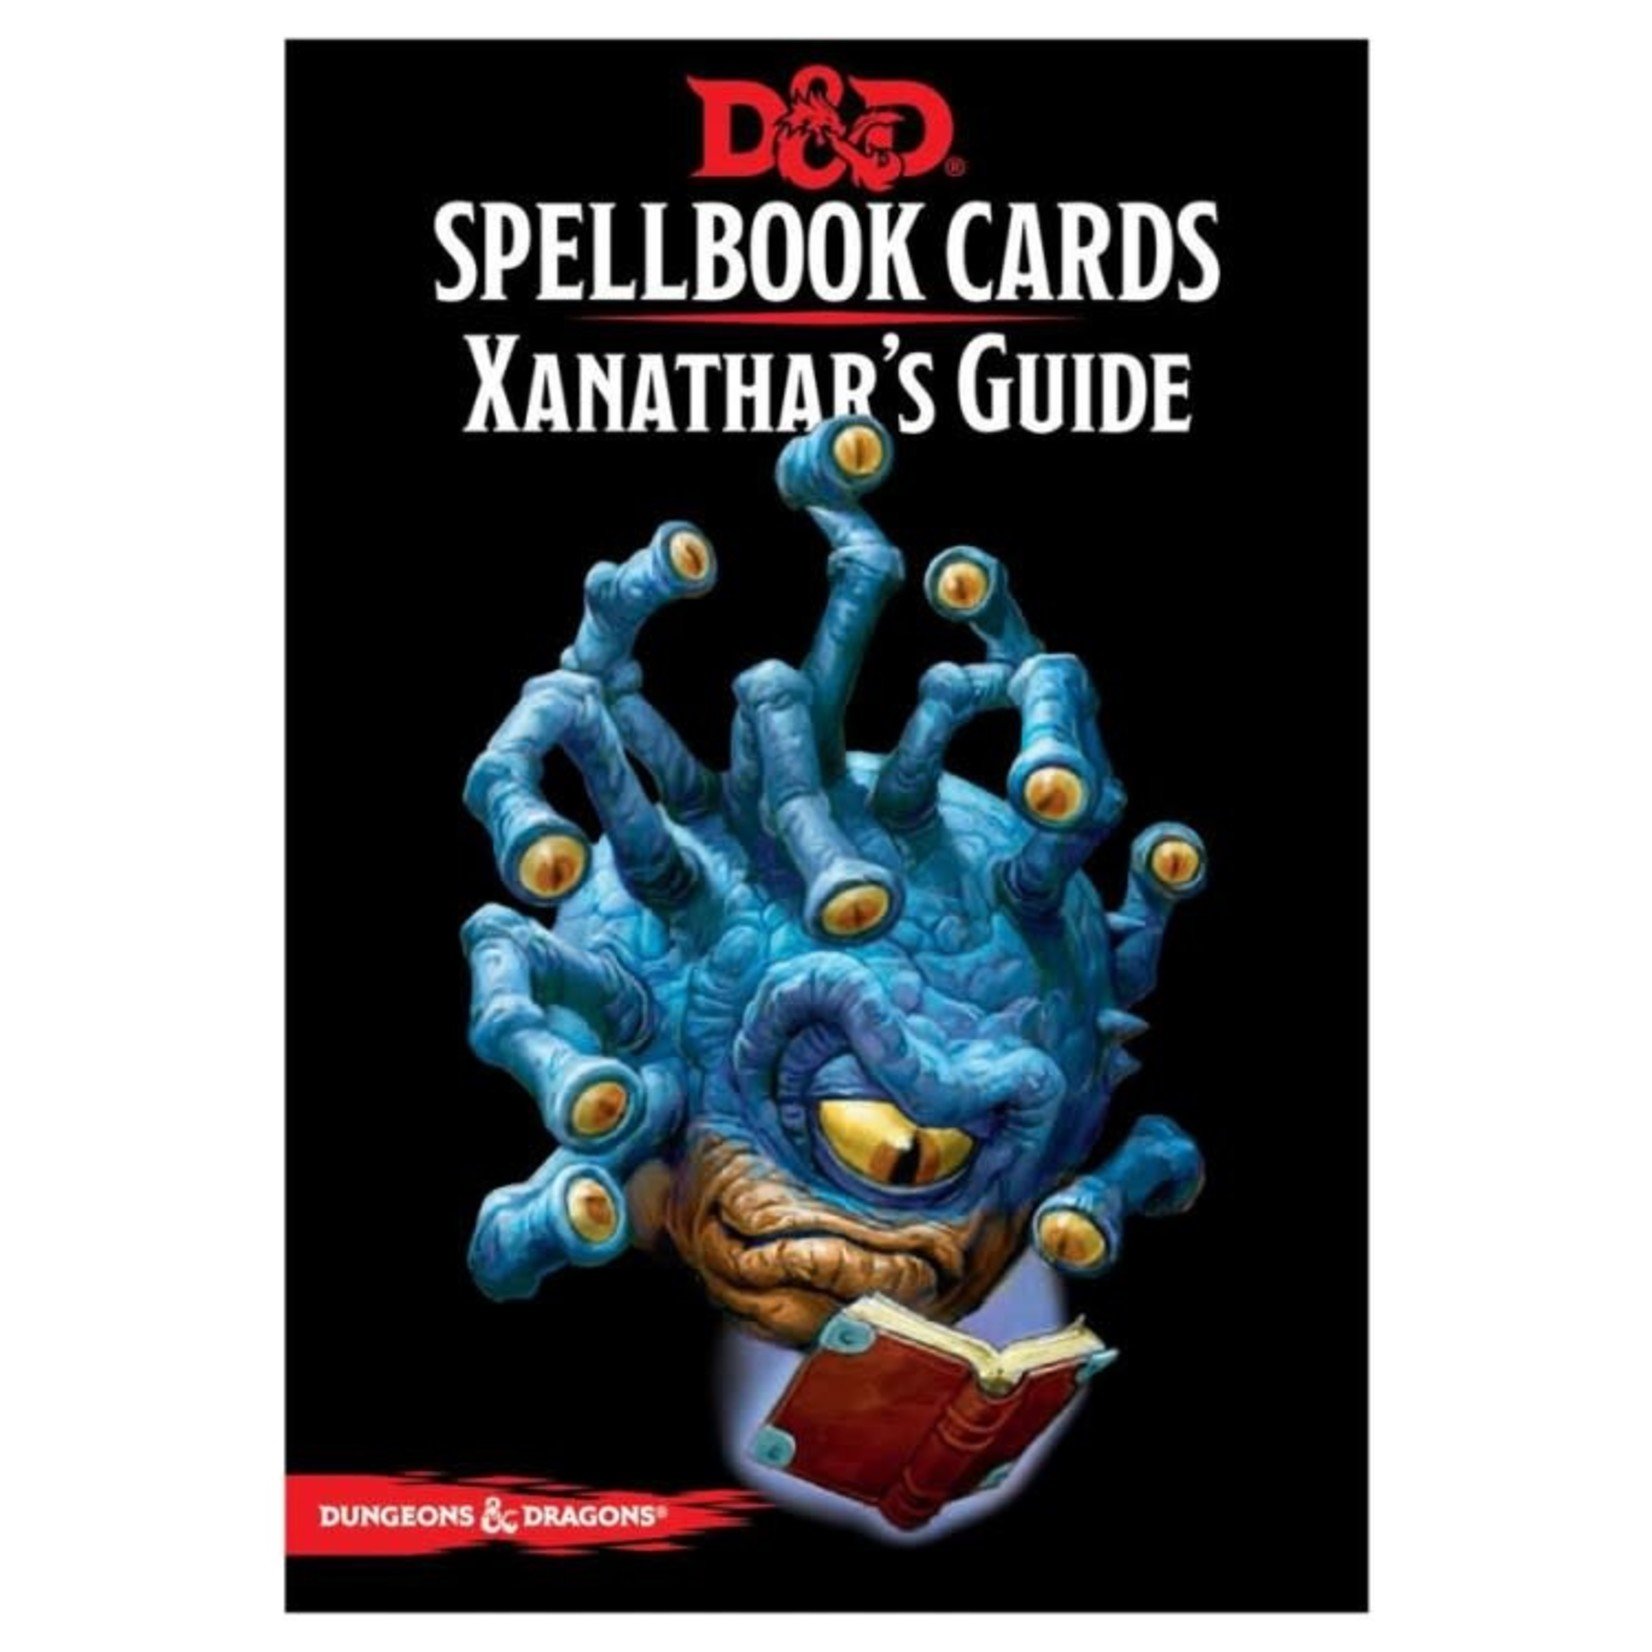 Gale Force 9 Dungeons and Dragons Spellbook Cards Xanathar's Guide